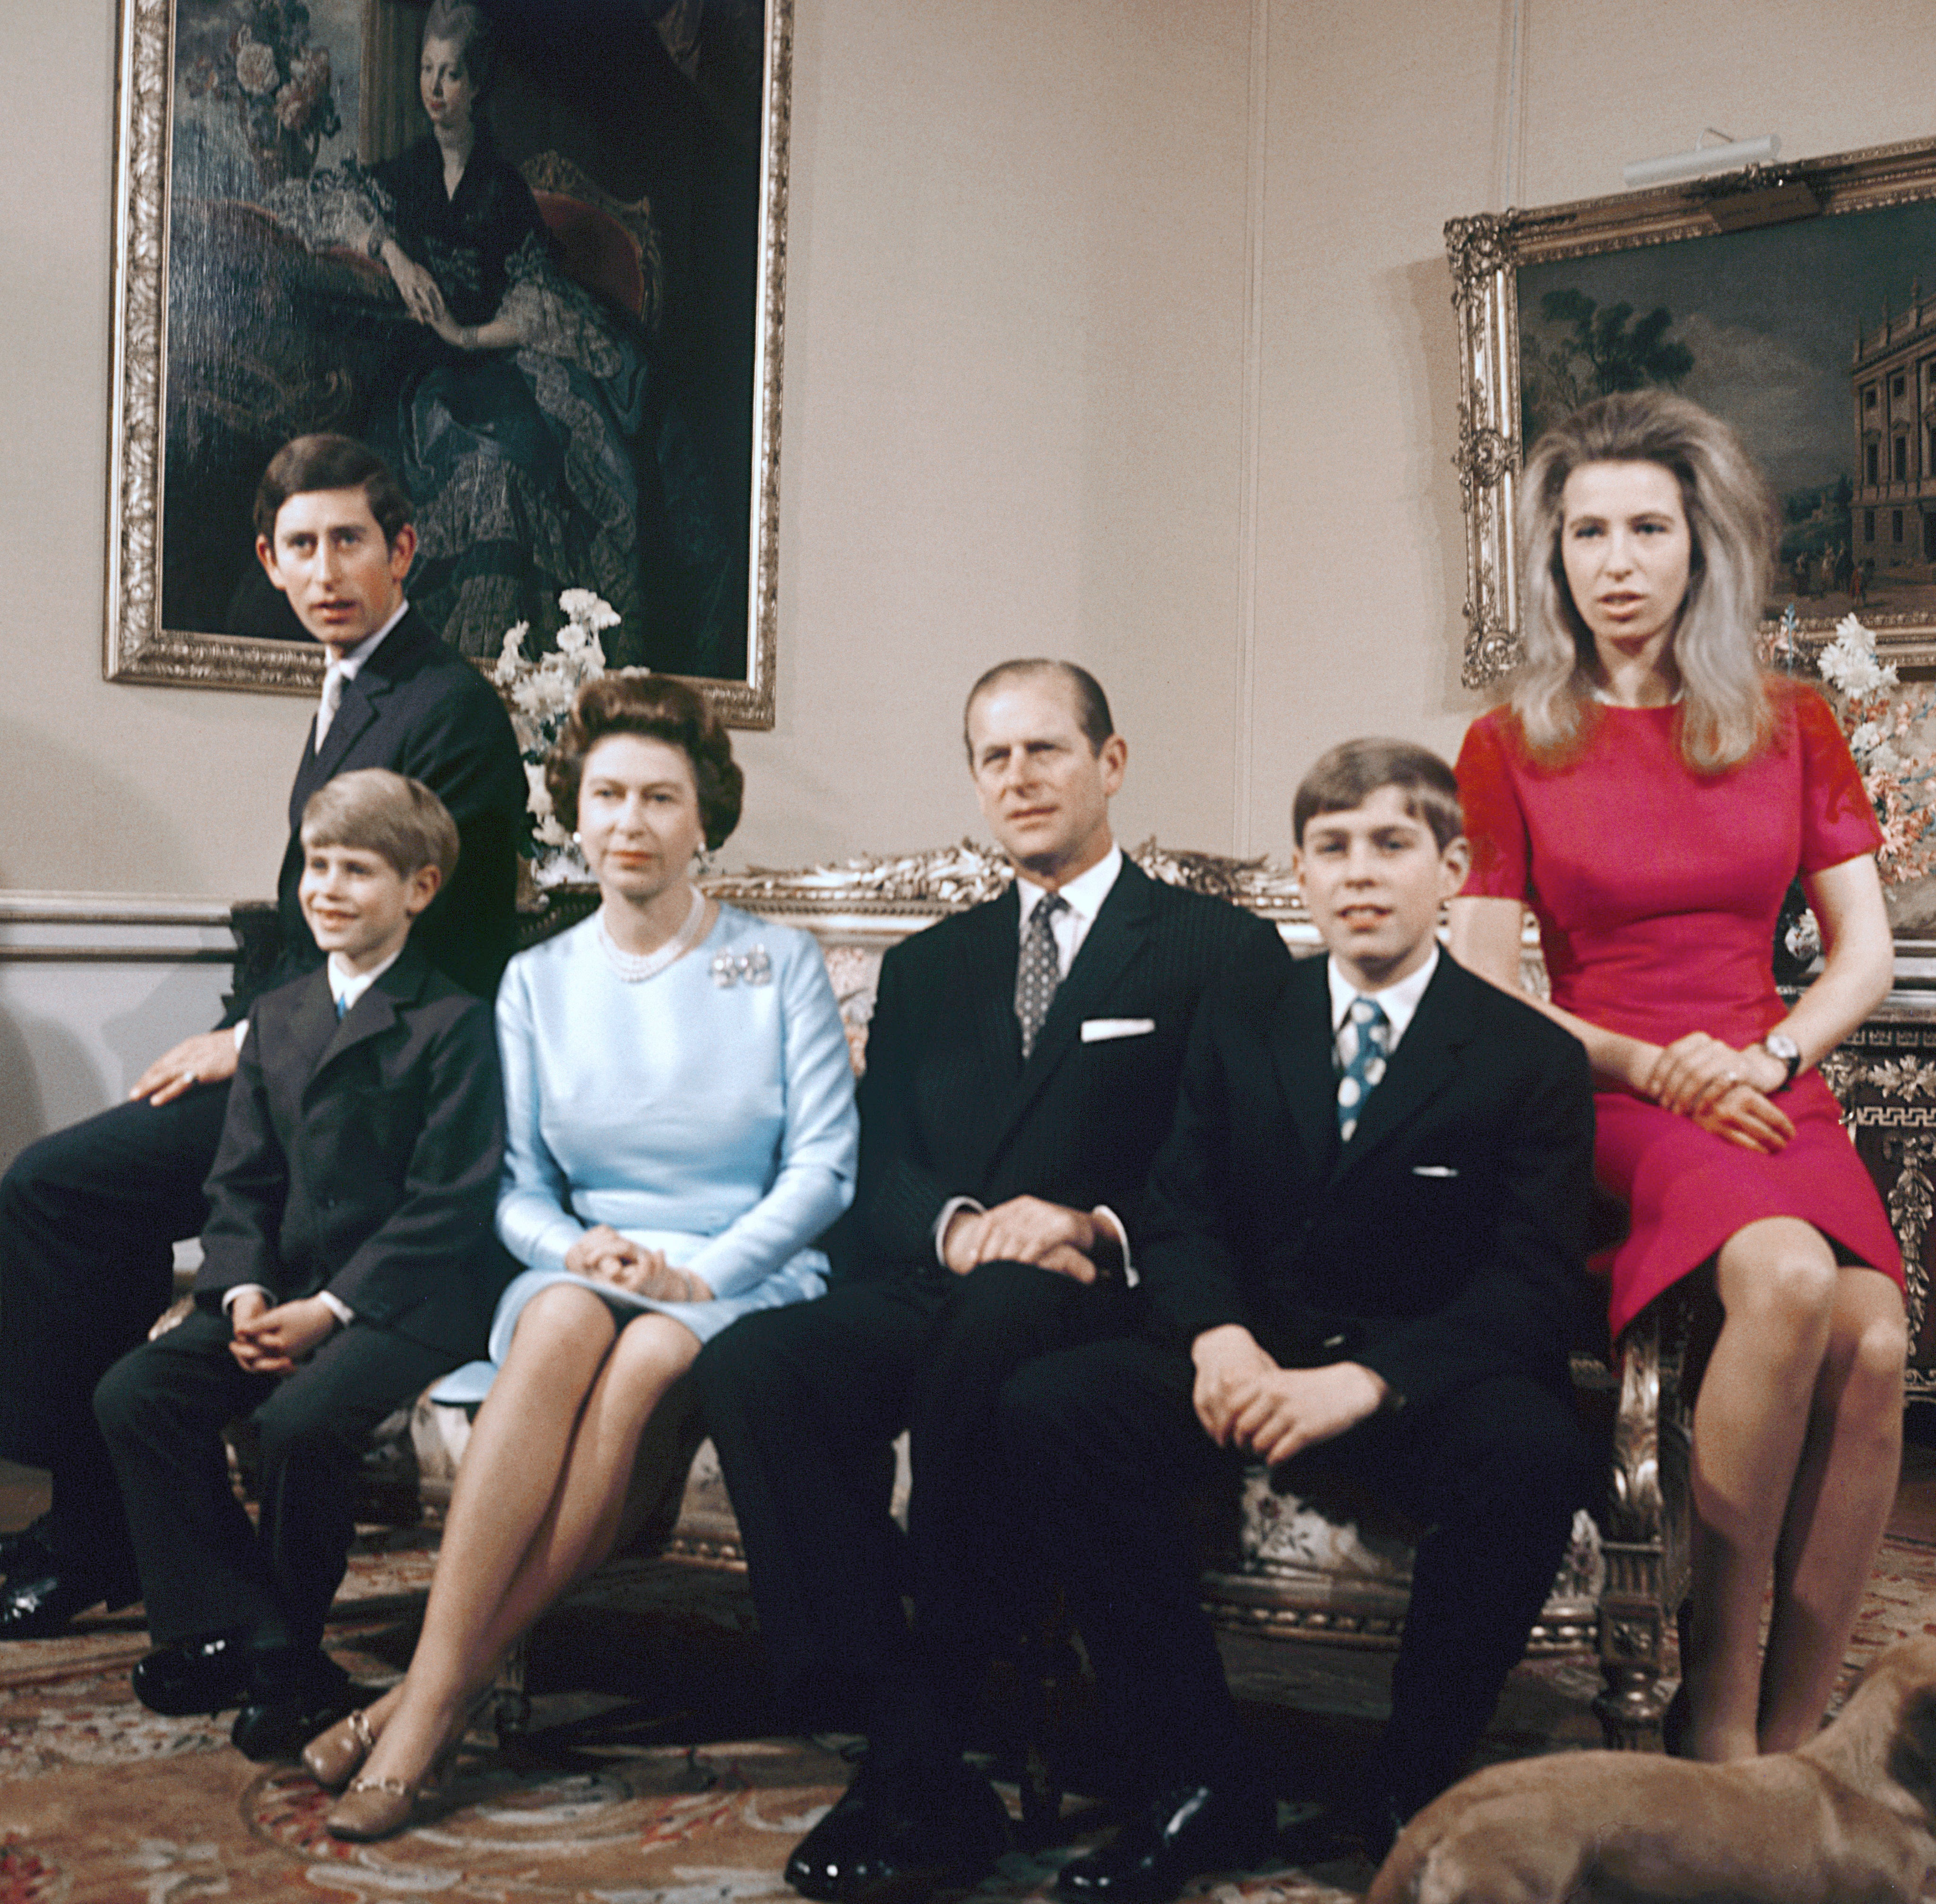 Prince Charles, Prince Edward, the Queen, the Duke of Edinburgh, Prince Andrew and Princess Anne at Buckingham Palace in 1972 (PA)